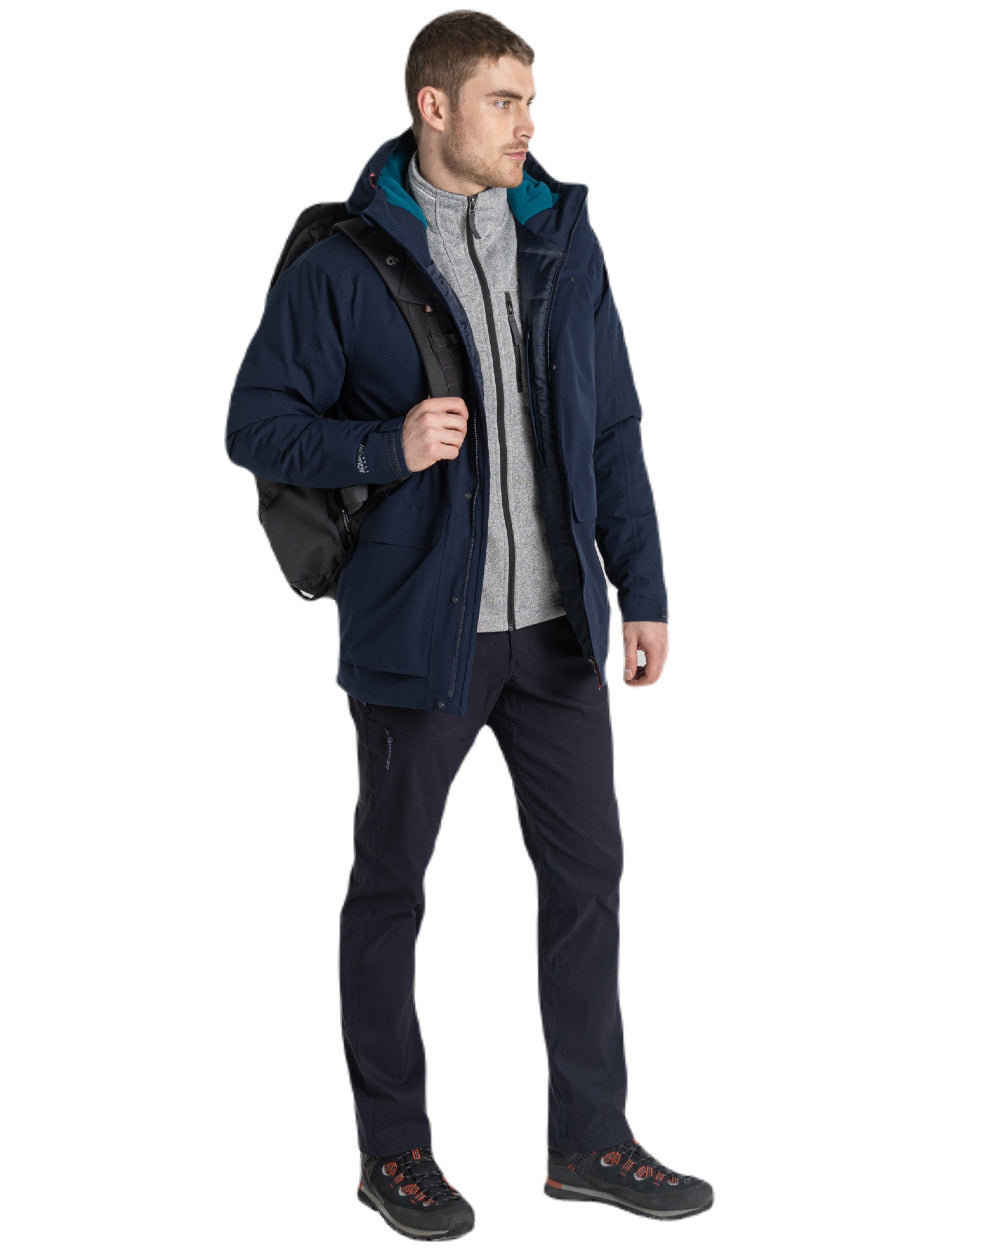 Blue Navy/Lagoon Blue Coloured Craghoppers Mens Lorton Thermic Jacket On A White Background 